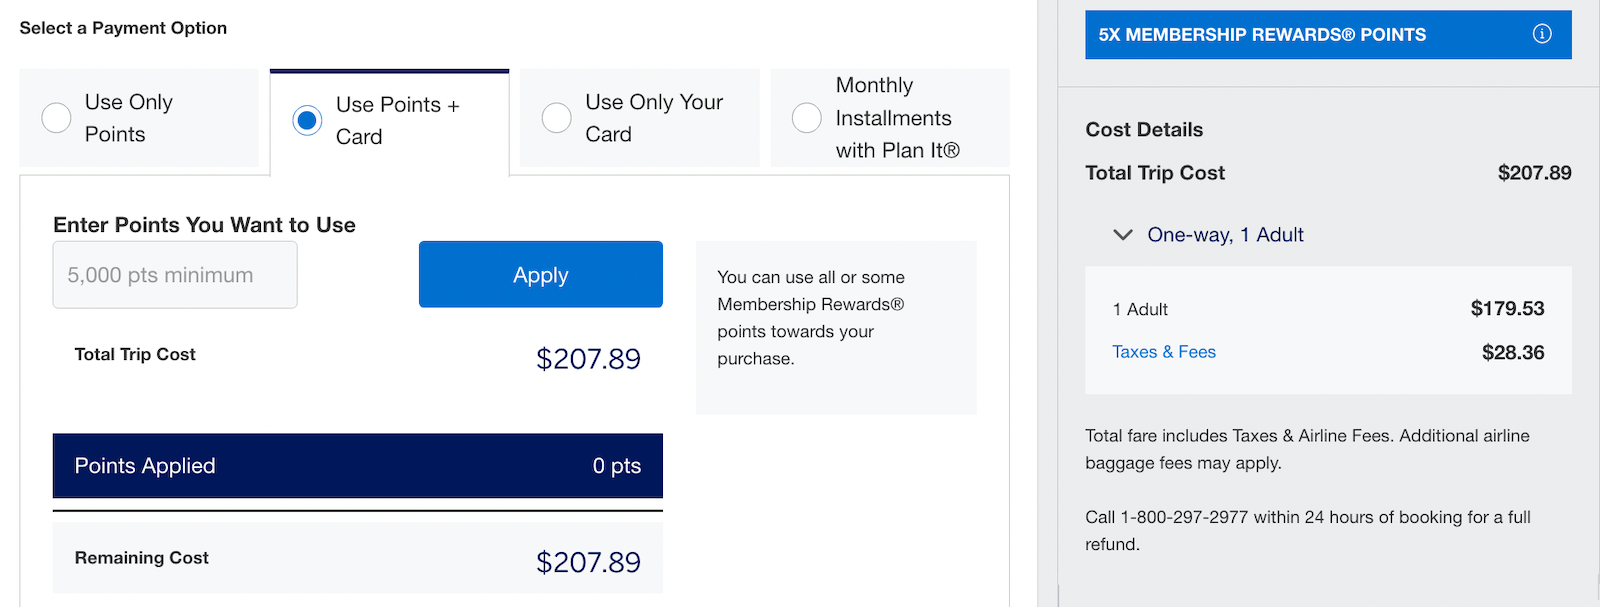 payment options on Amex Travel, showing the ability to use credit card, points or a mix of the two